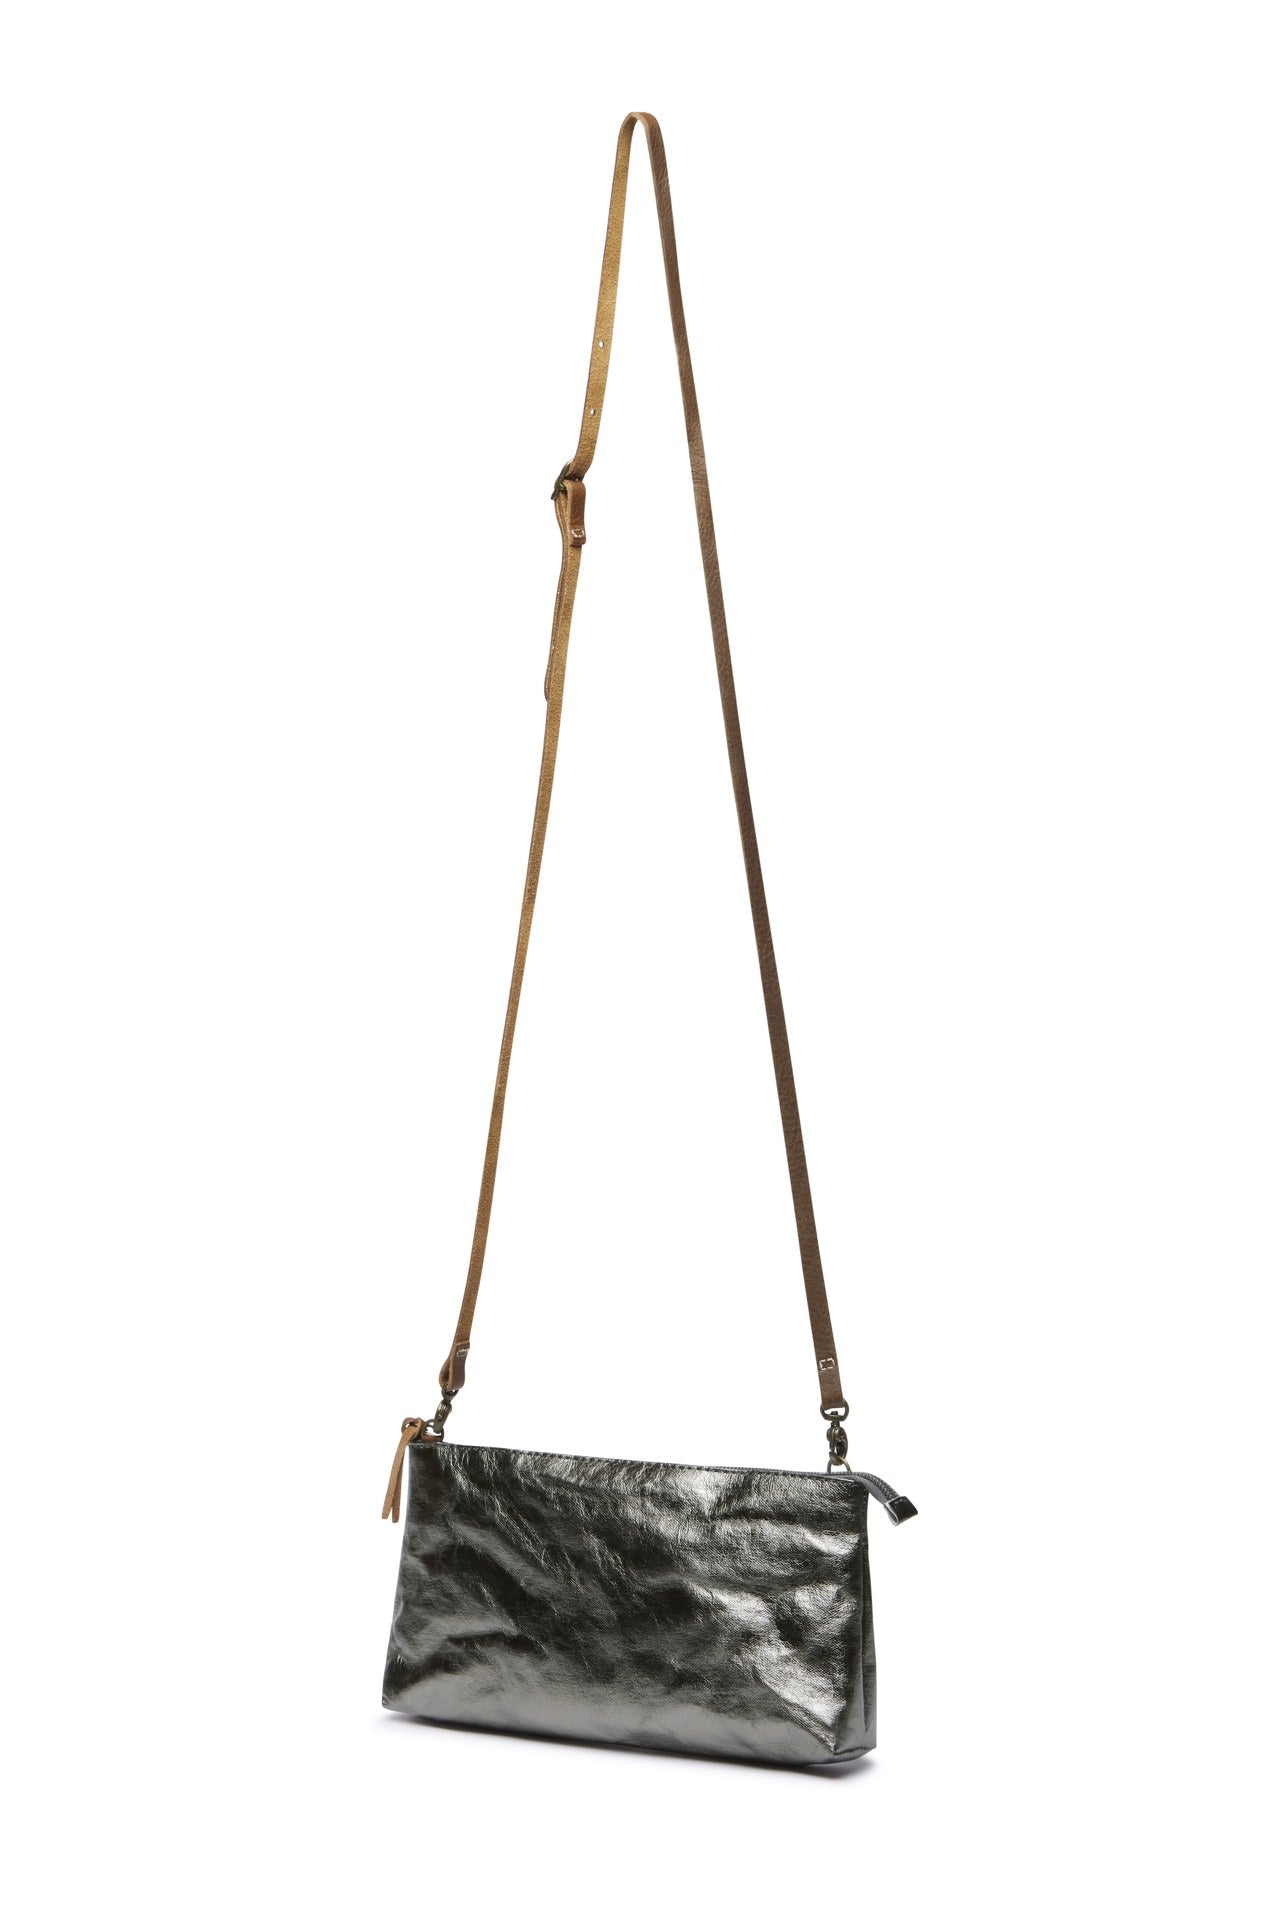 A pewter metallic washable paper small zip top handbag is shown with a long brown washable paper strap.